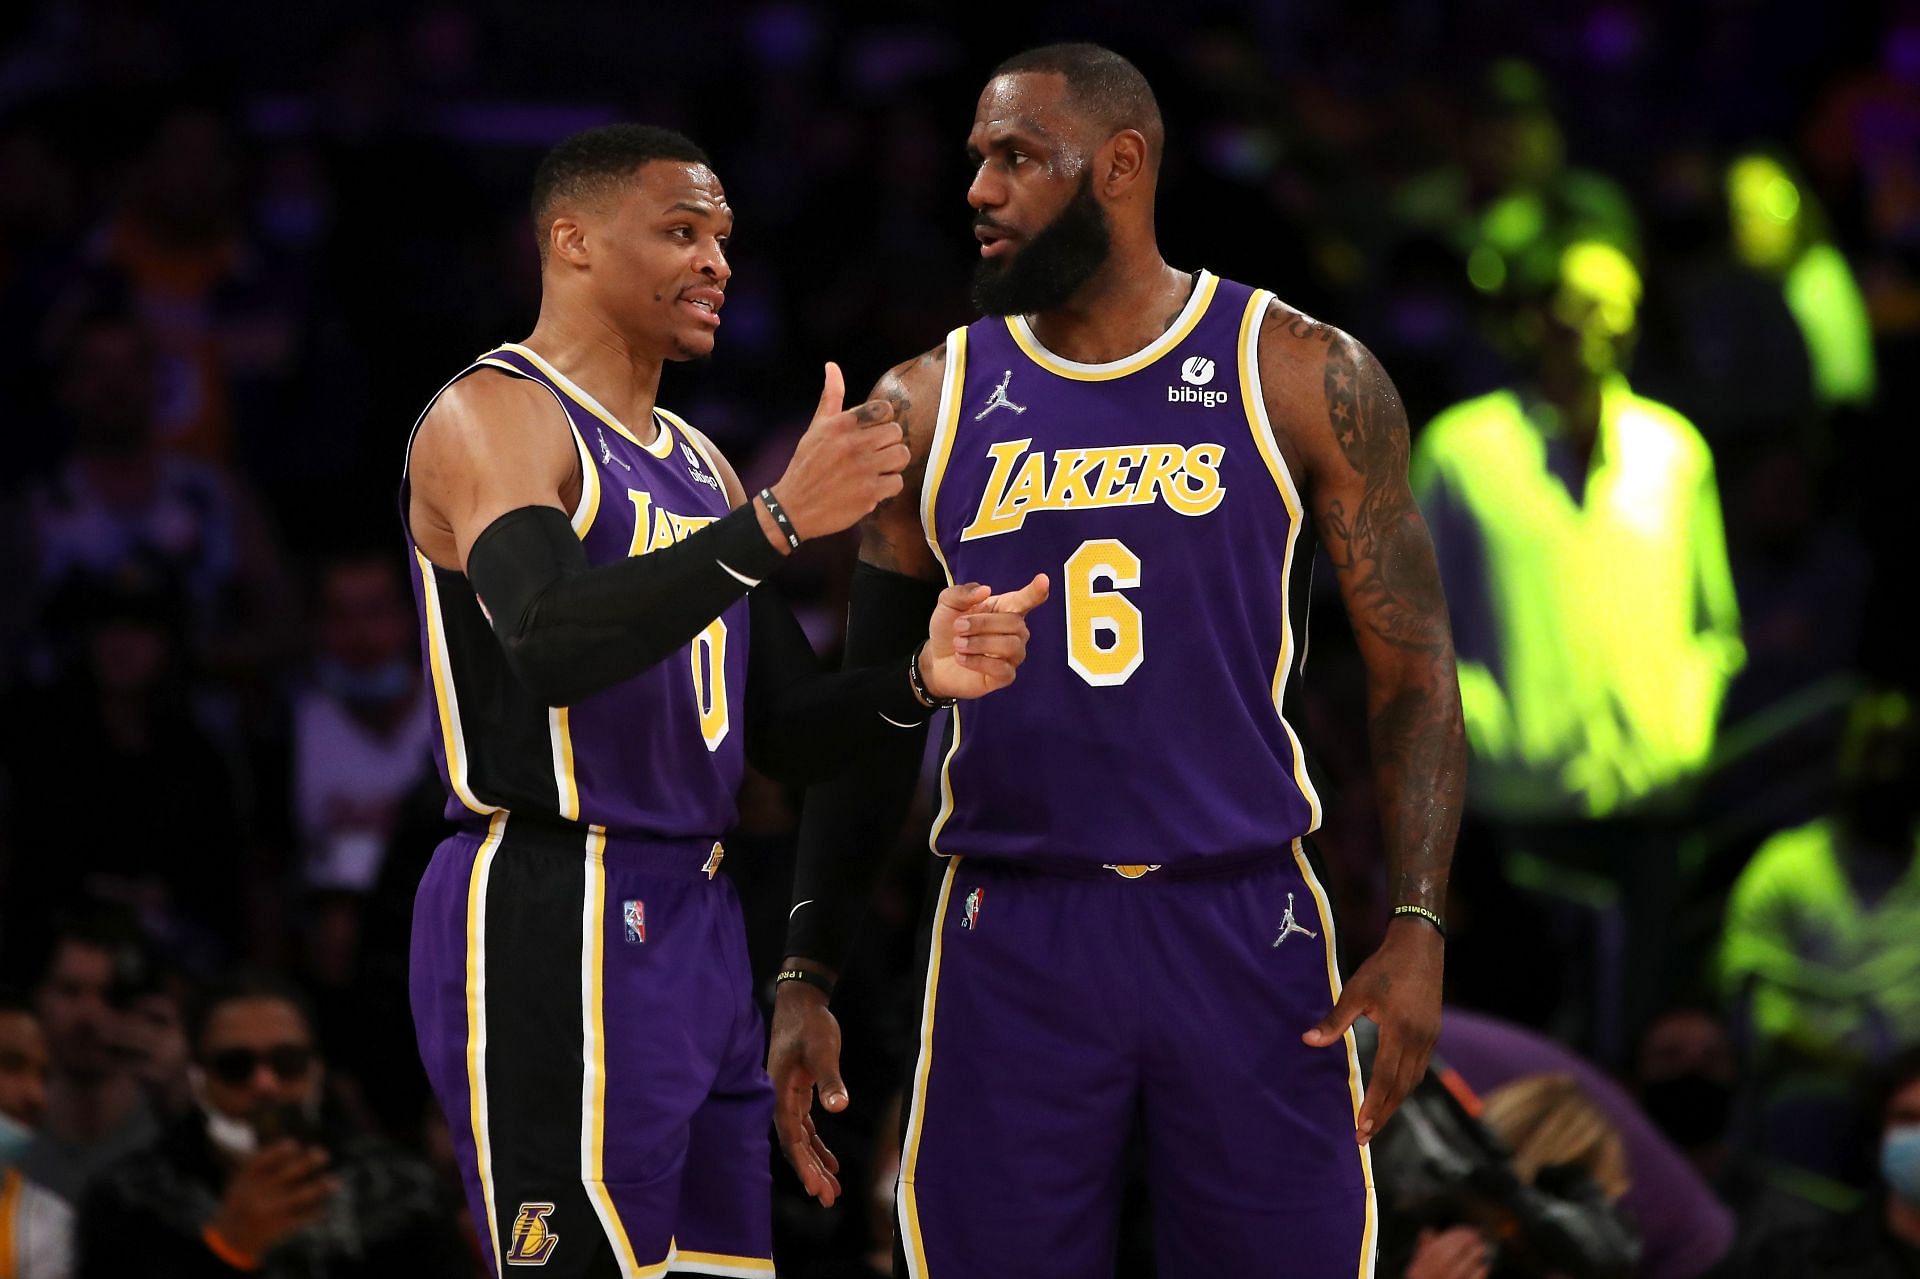 LeBron James was reponsible for bringing Westbrook to the Los Angeles Lakers, a decision that is now being called into question.